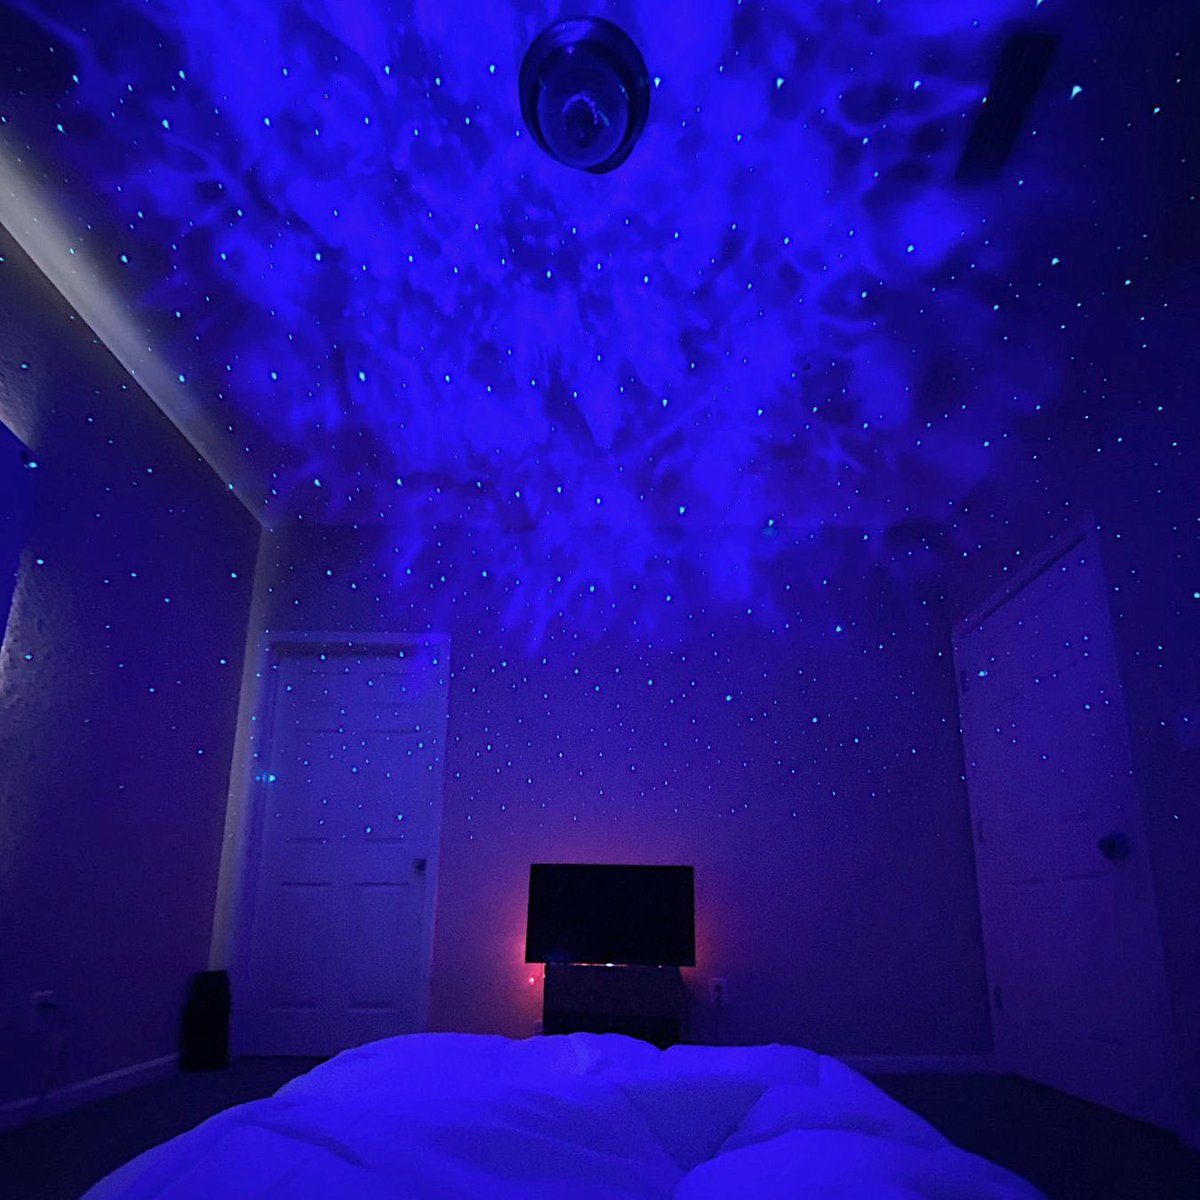 While you’re here….check out these amazing projections that light up your room beautifully   https://oceangalaxylight.shop/products/light 